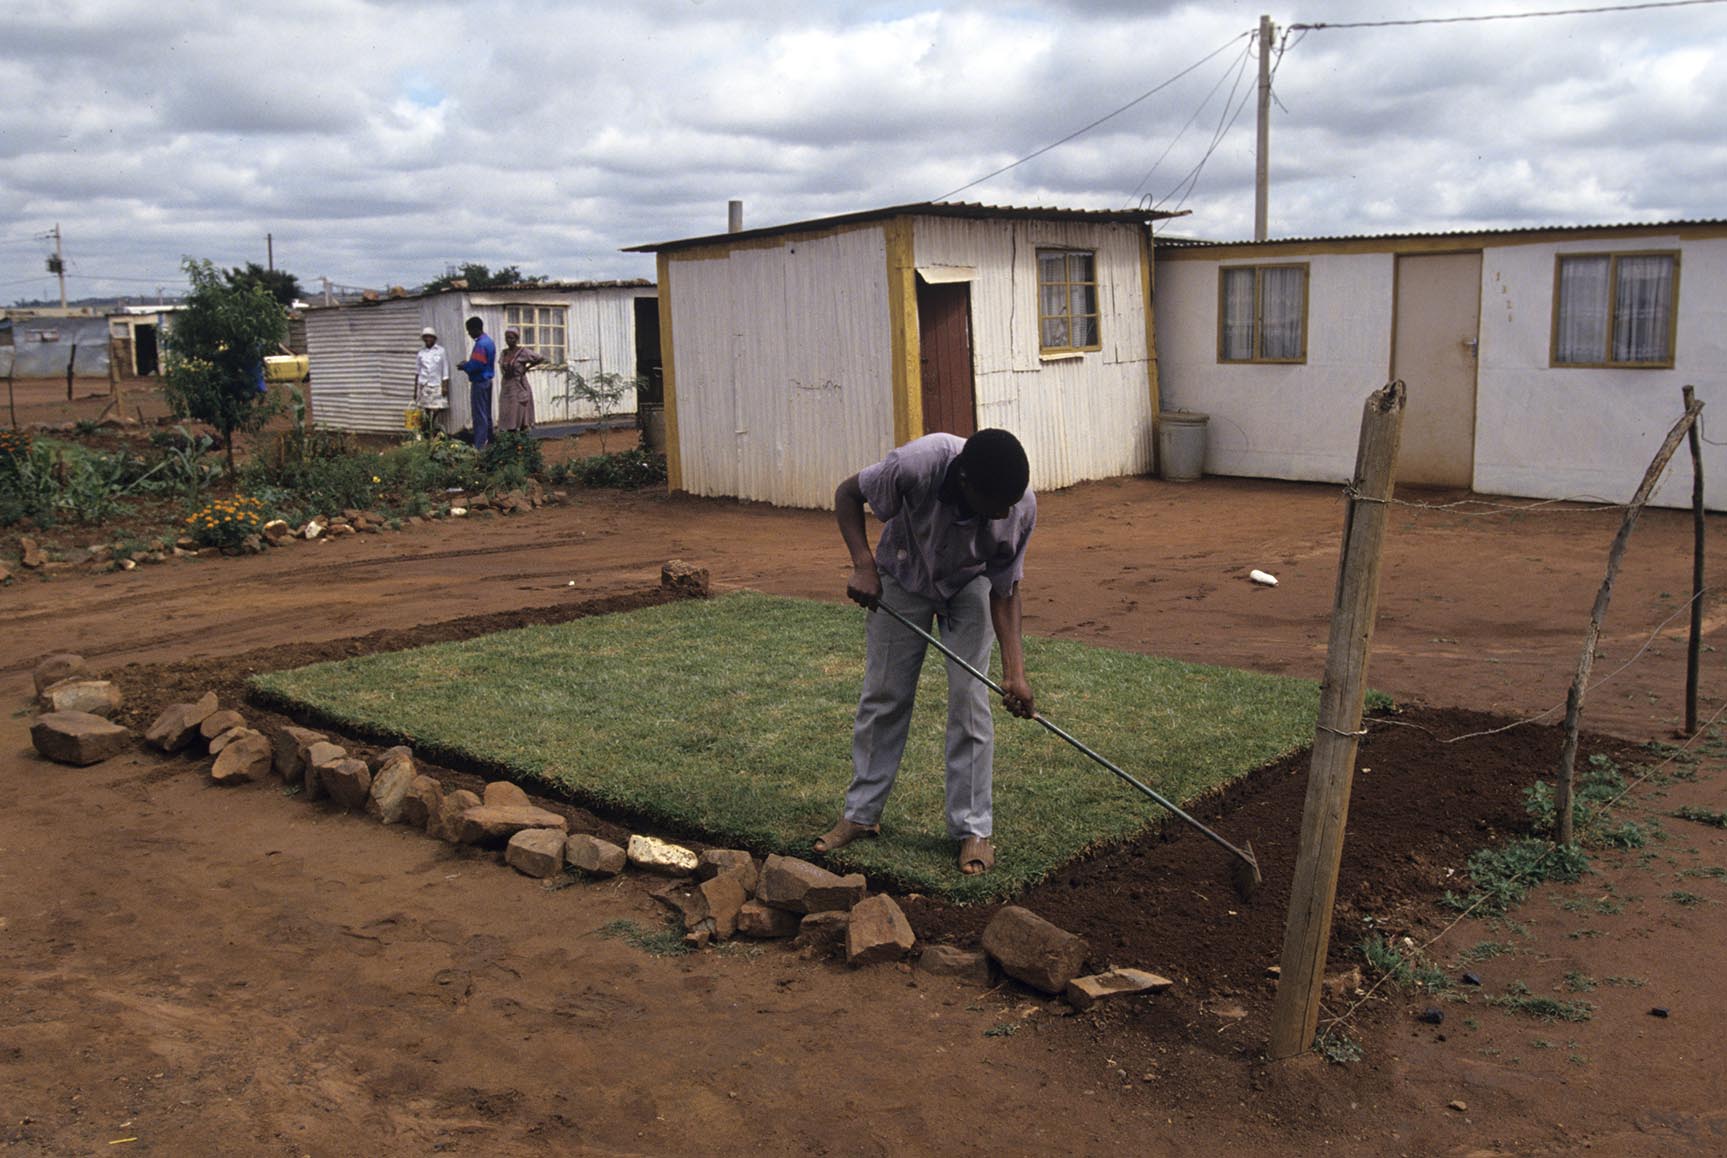 A man plants gras around shanty homes in Soweto,  an urban area of the city of Johannesburg, South Africa.  Its origins are as a very poor and impoverished black township under South Africa's Apartheid government. The population has historically been overwhelmingly black and some of the watershed events in the struggle against Apartheid occurred in the township.